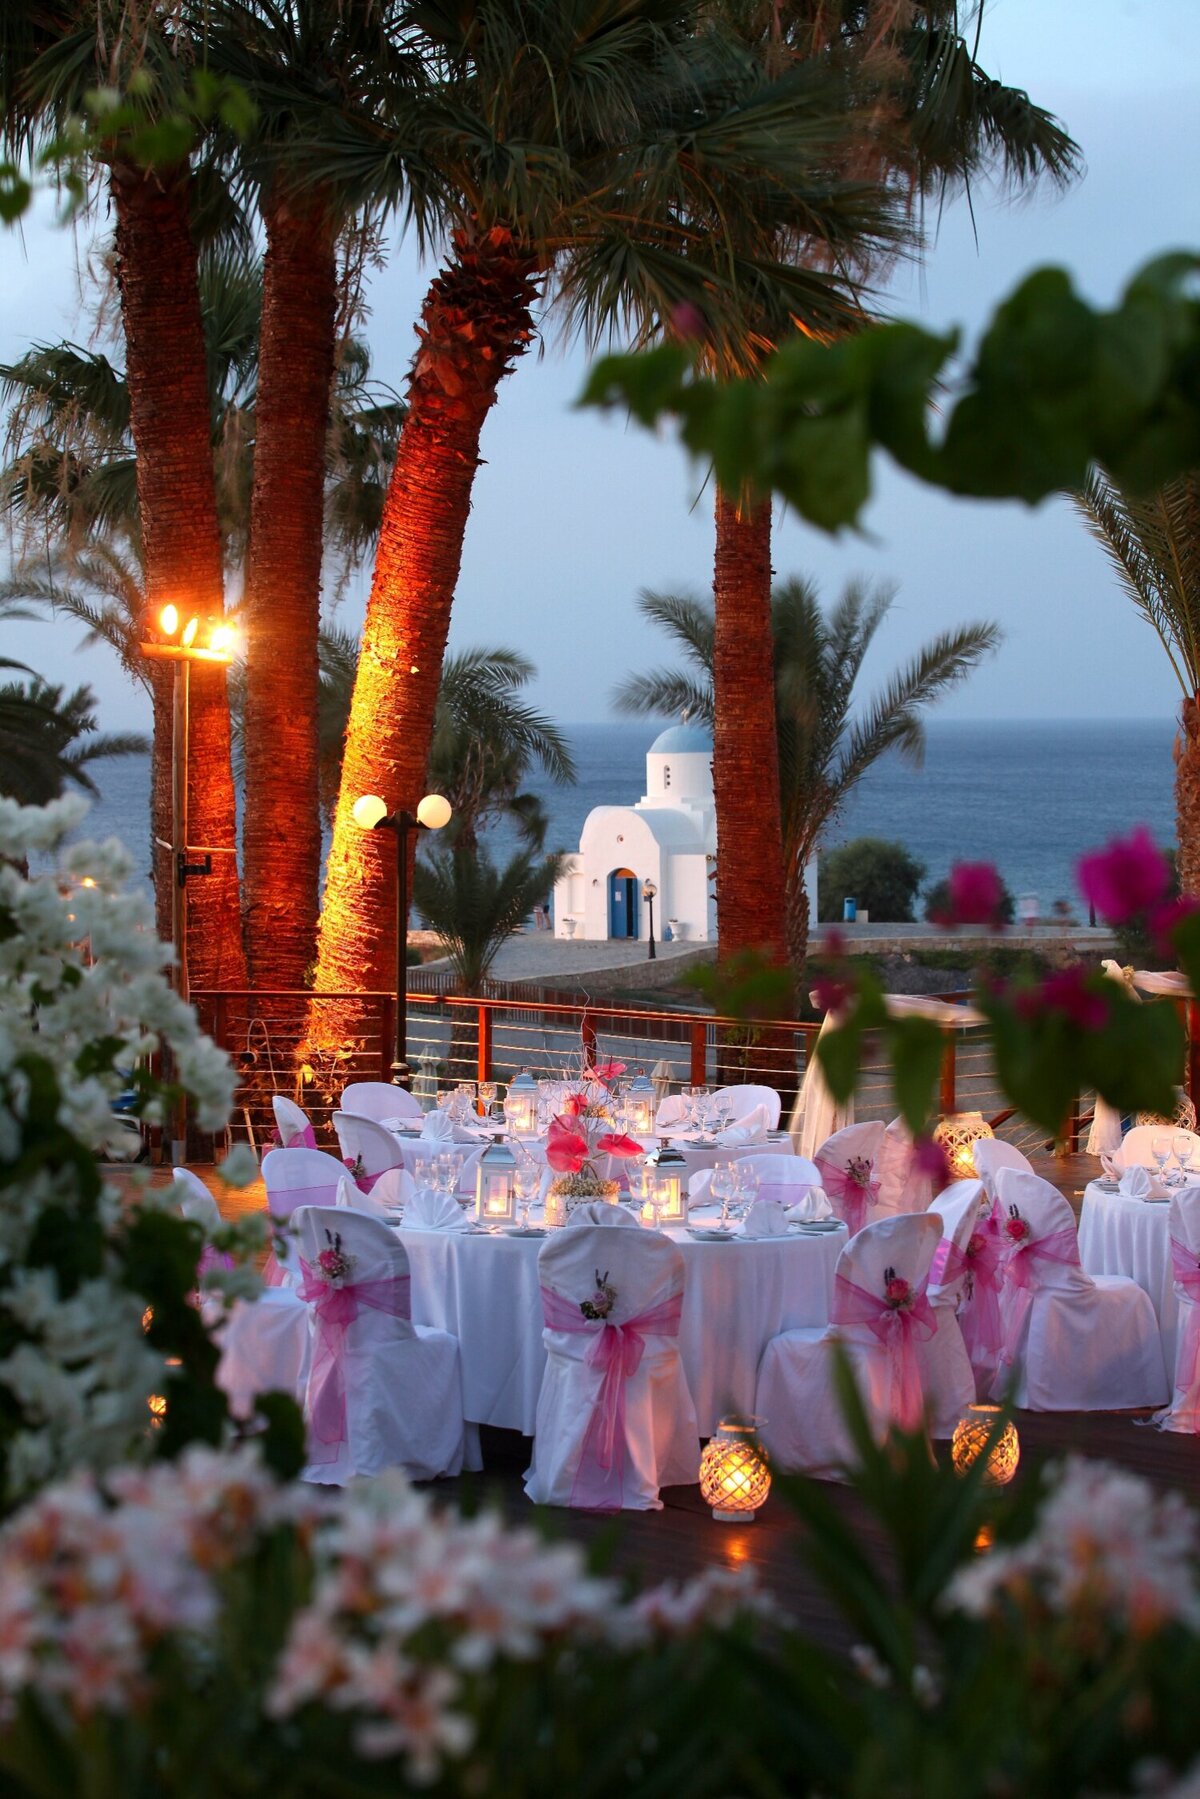 Banqueting tables decorated with pink voile sit infront of a backdrop of a quaint chapel in the distance